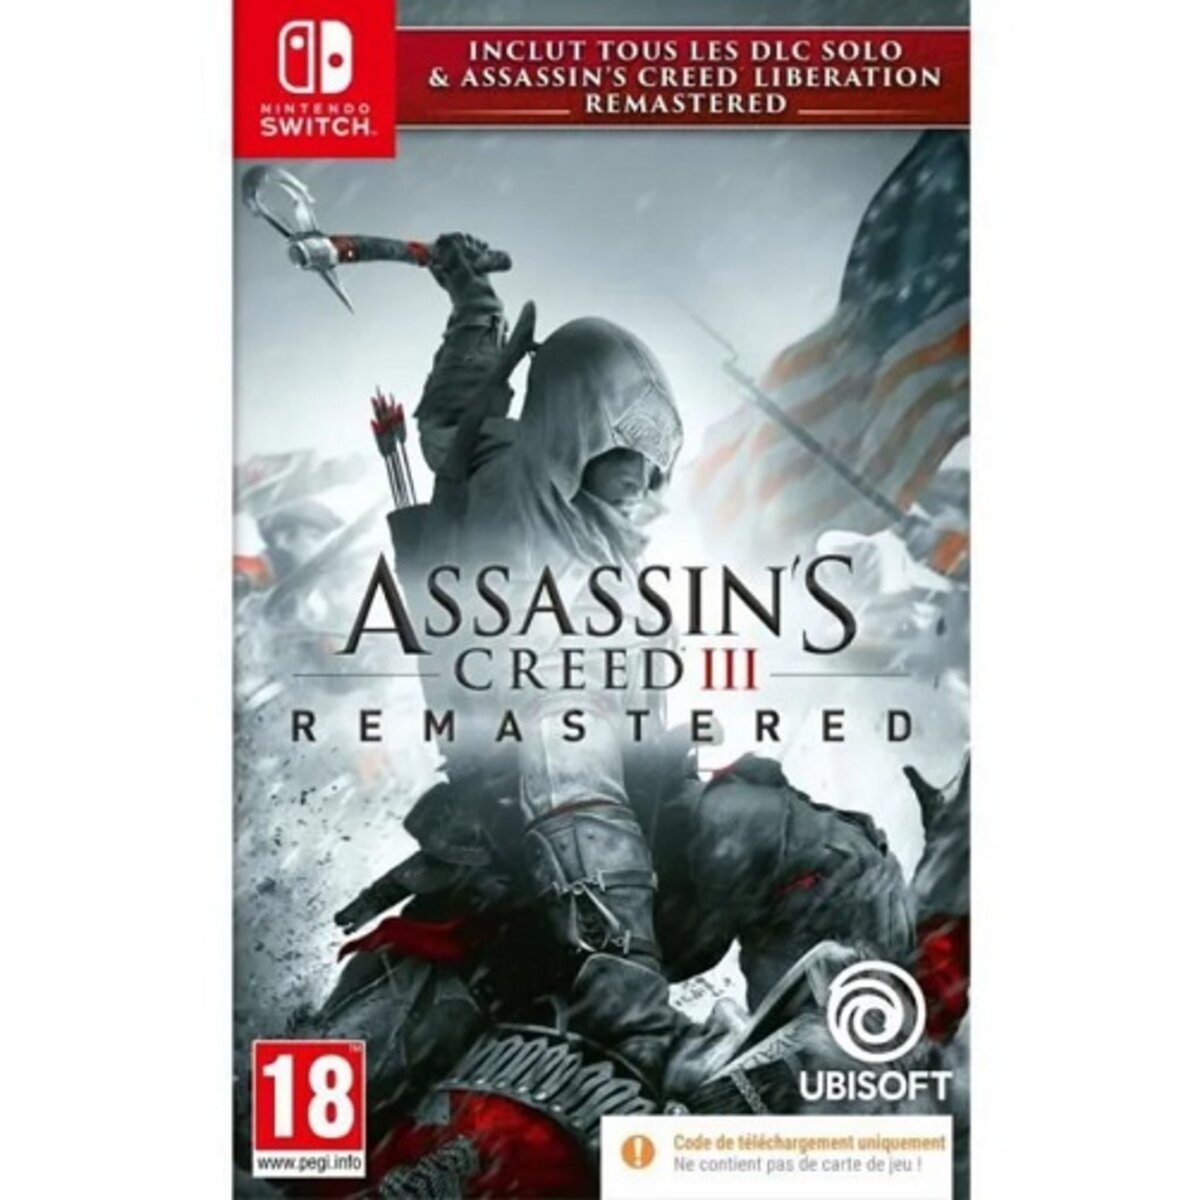 Assassin's Creed 3 + Assassin's Creed Liberation Remaster (code in a box) Nintendo Switch